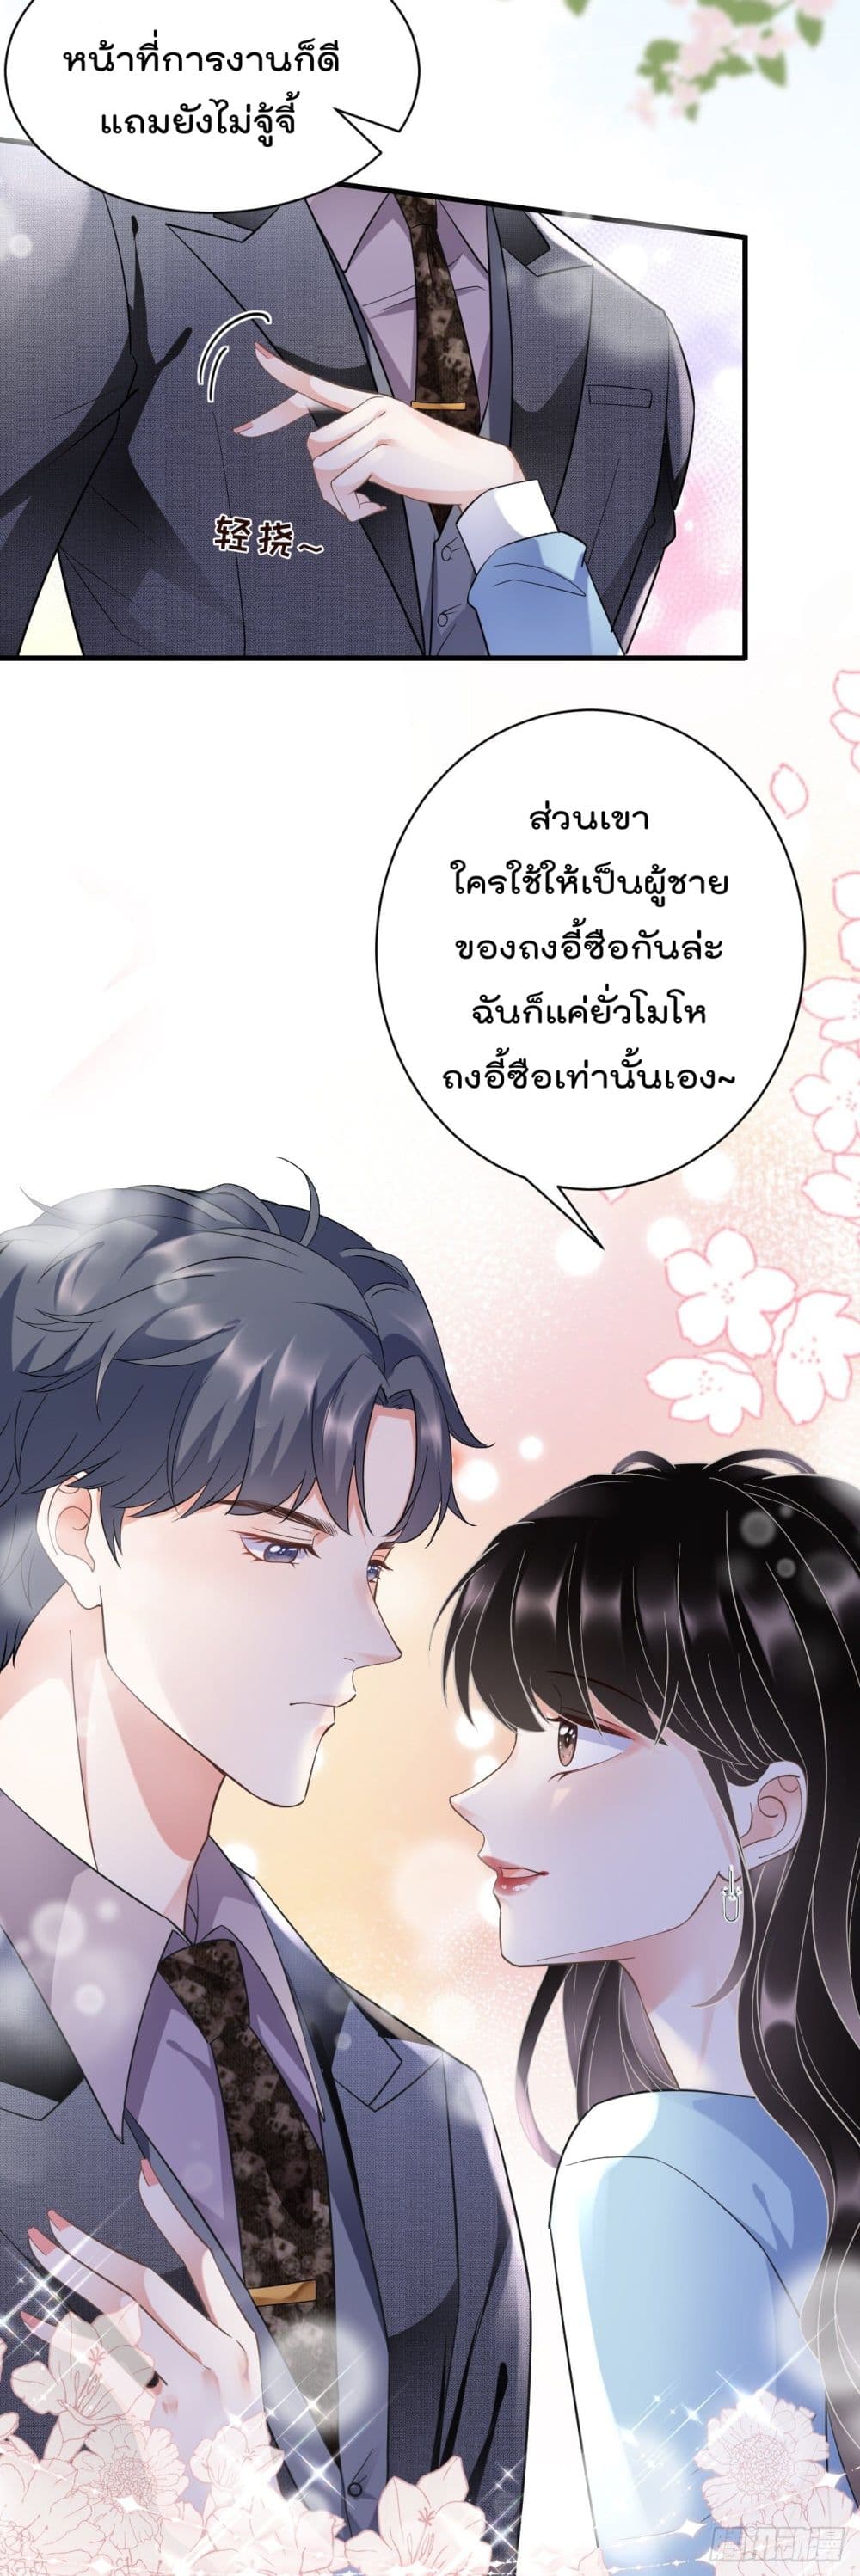 What Can the Eldest Lady Have คุณหนูใหญ่ ทำไมคุณร้ายอย่างนี้ 11-11